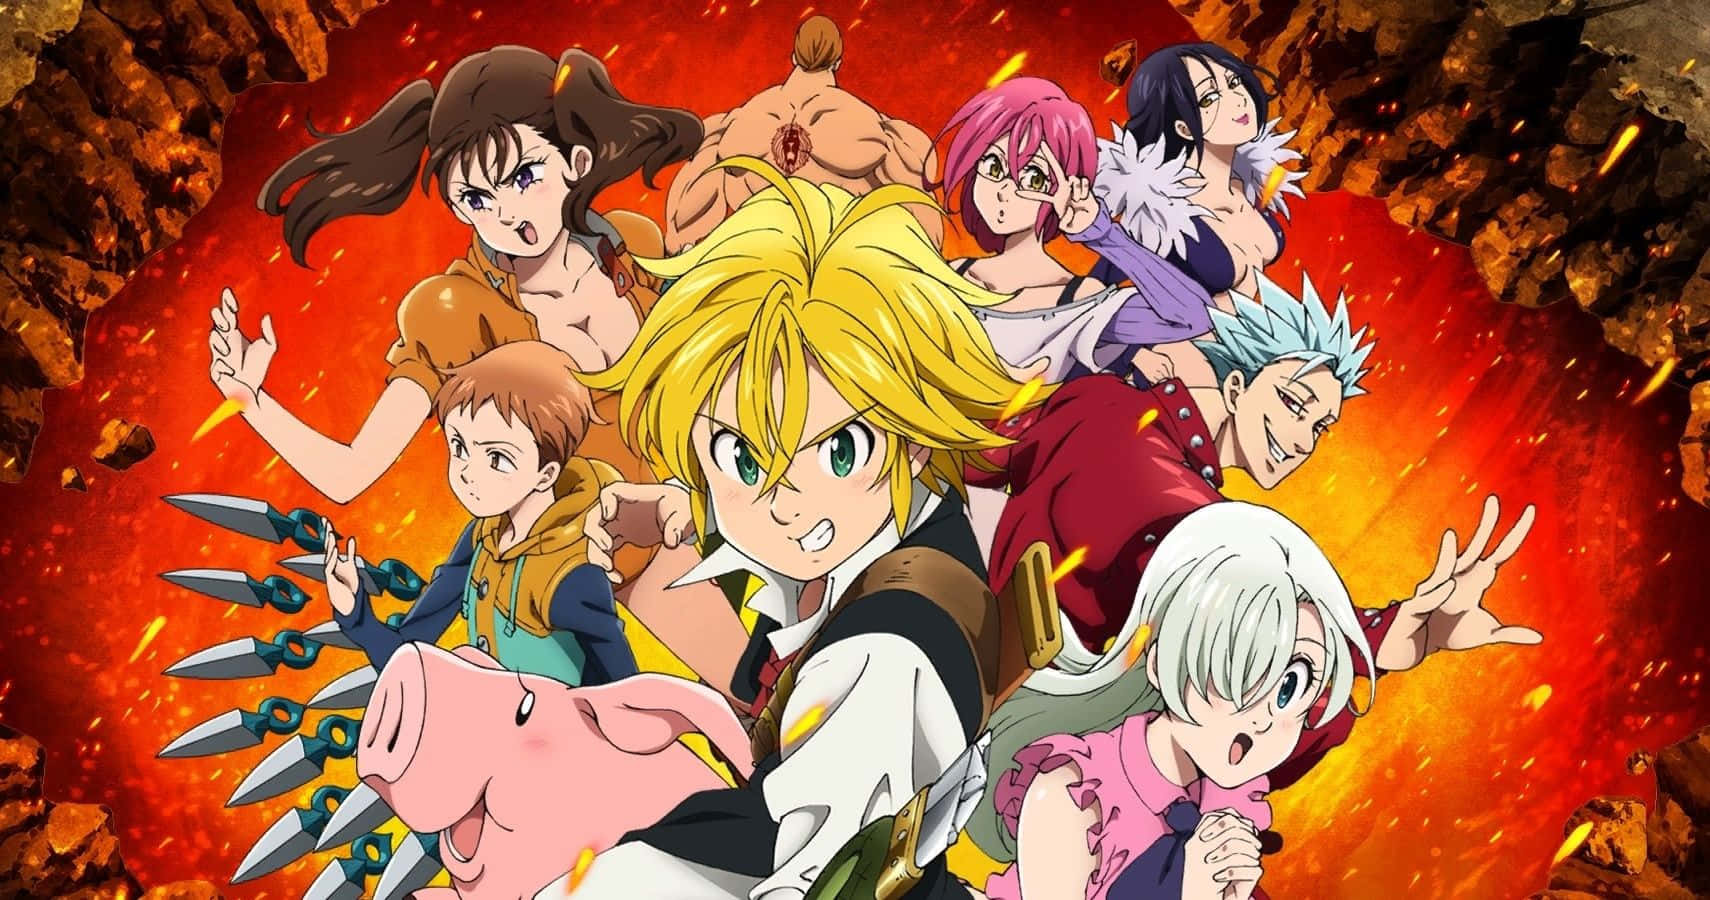 See the Spectacle of the Seven Deadly Sins Wallpaper